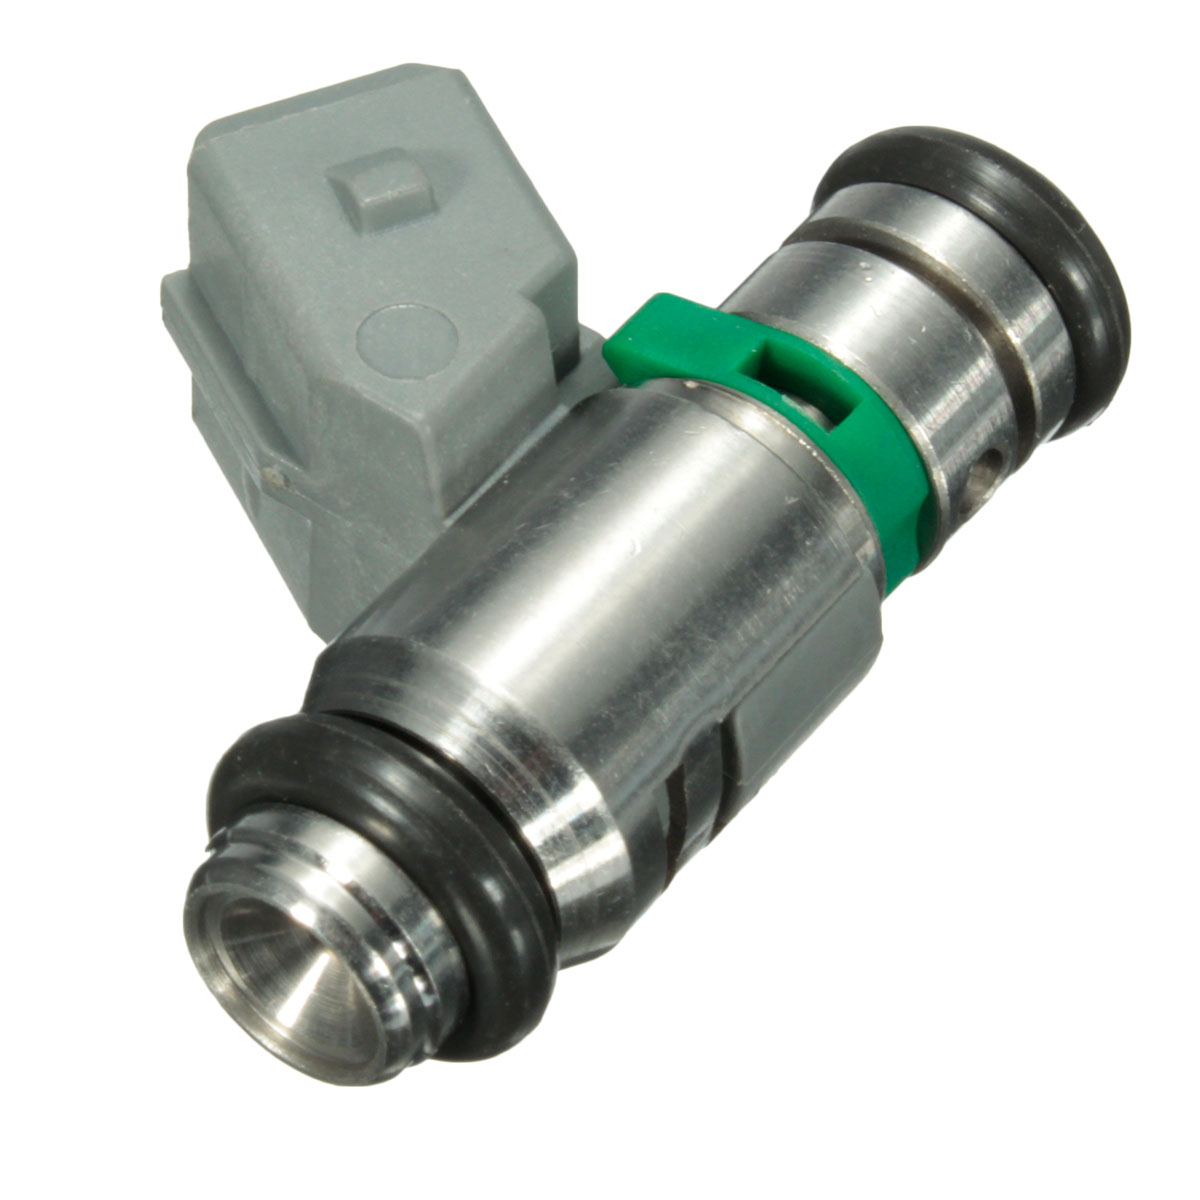 Petrol-Fuel-Injector-IWP042-For-Renault-Clio-SPORT-172182-Megane-Scenic-Espace-1034297